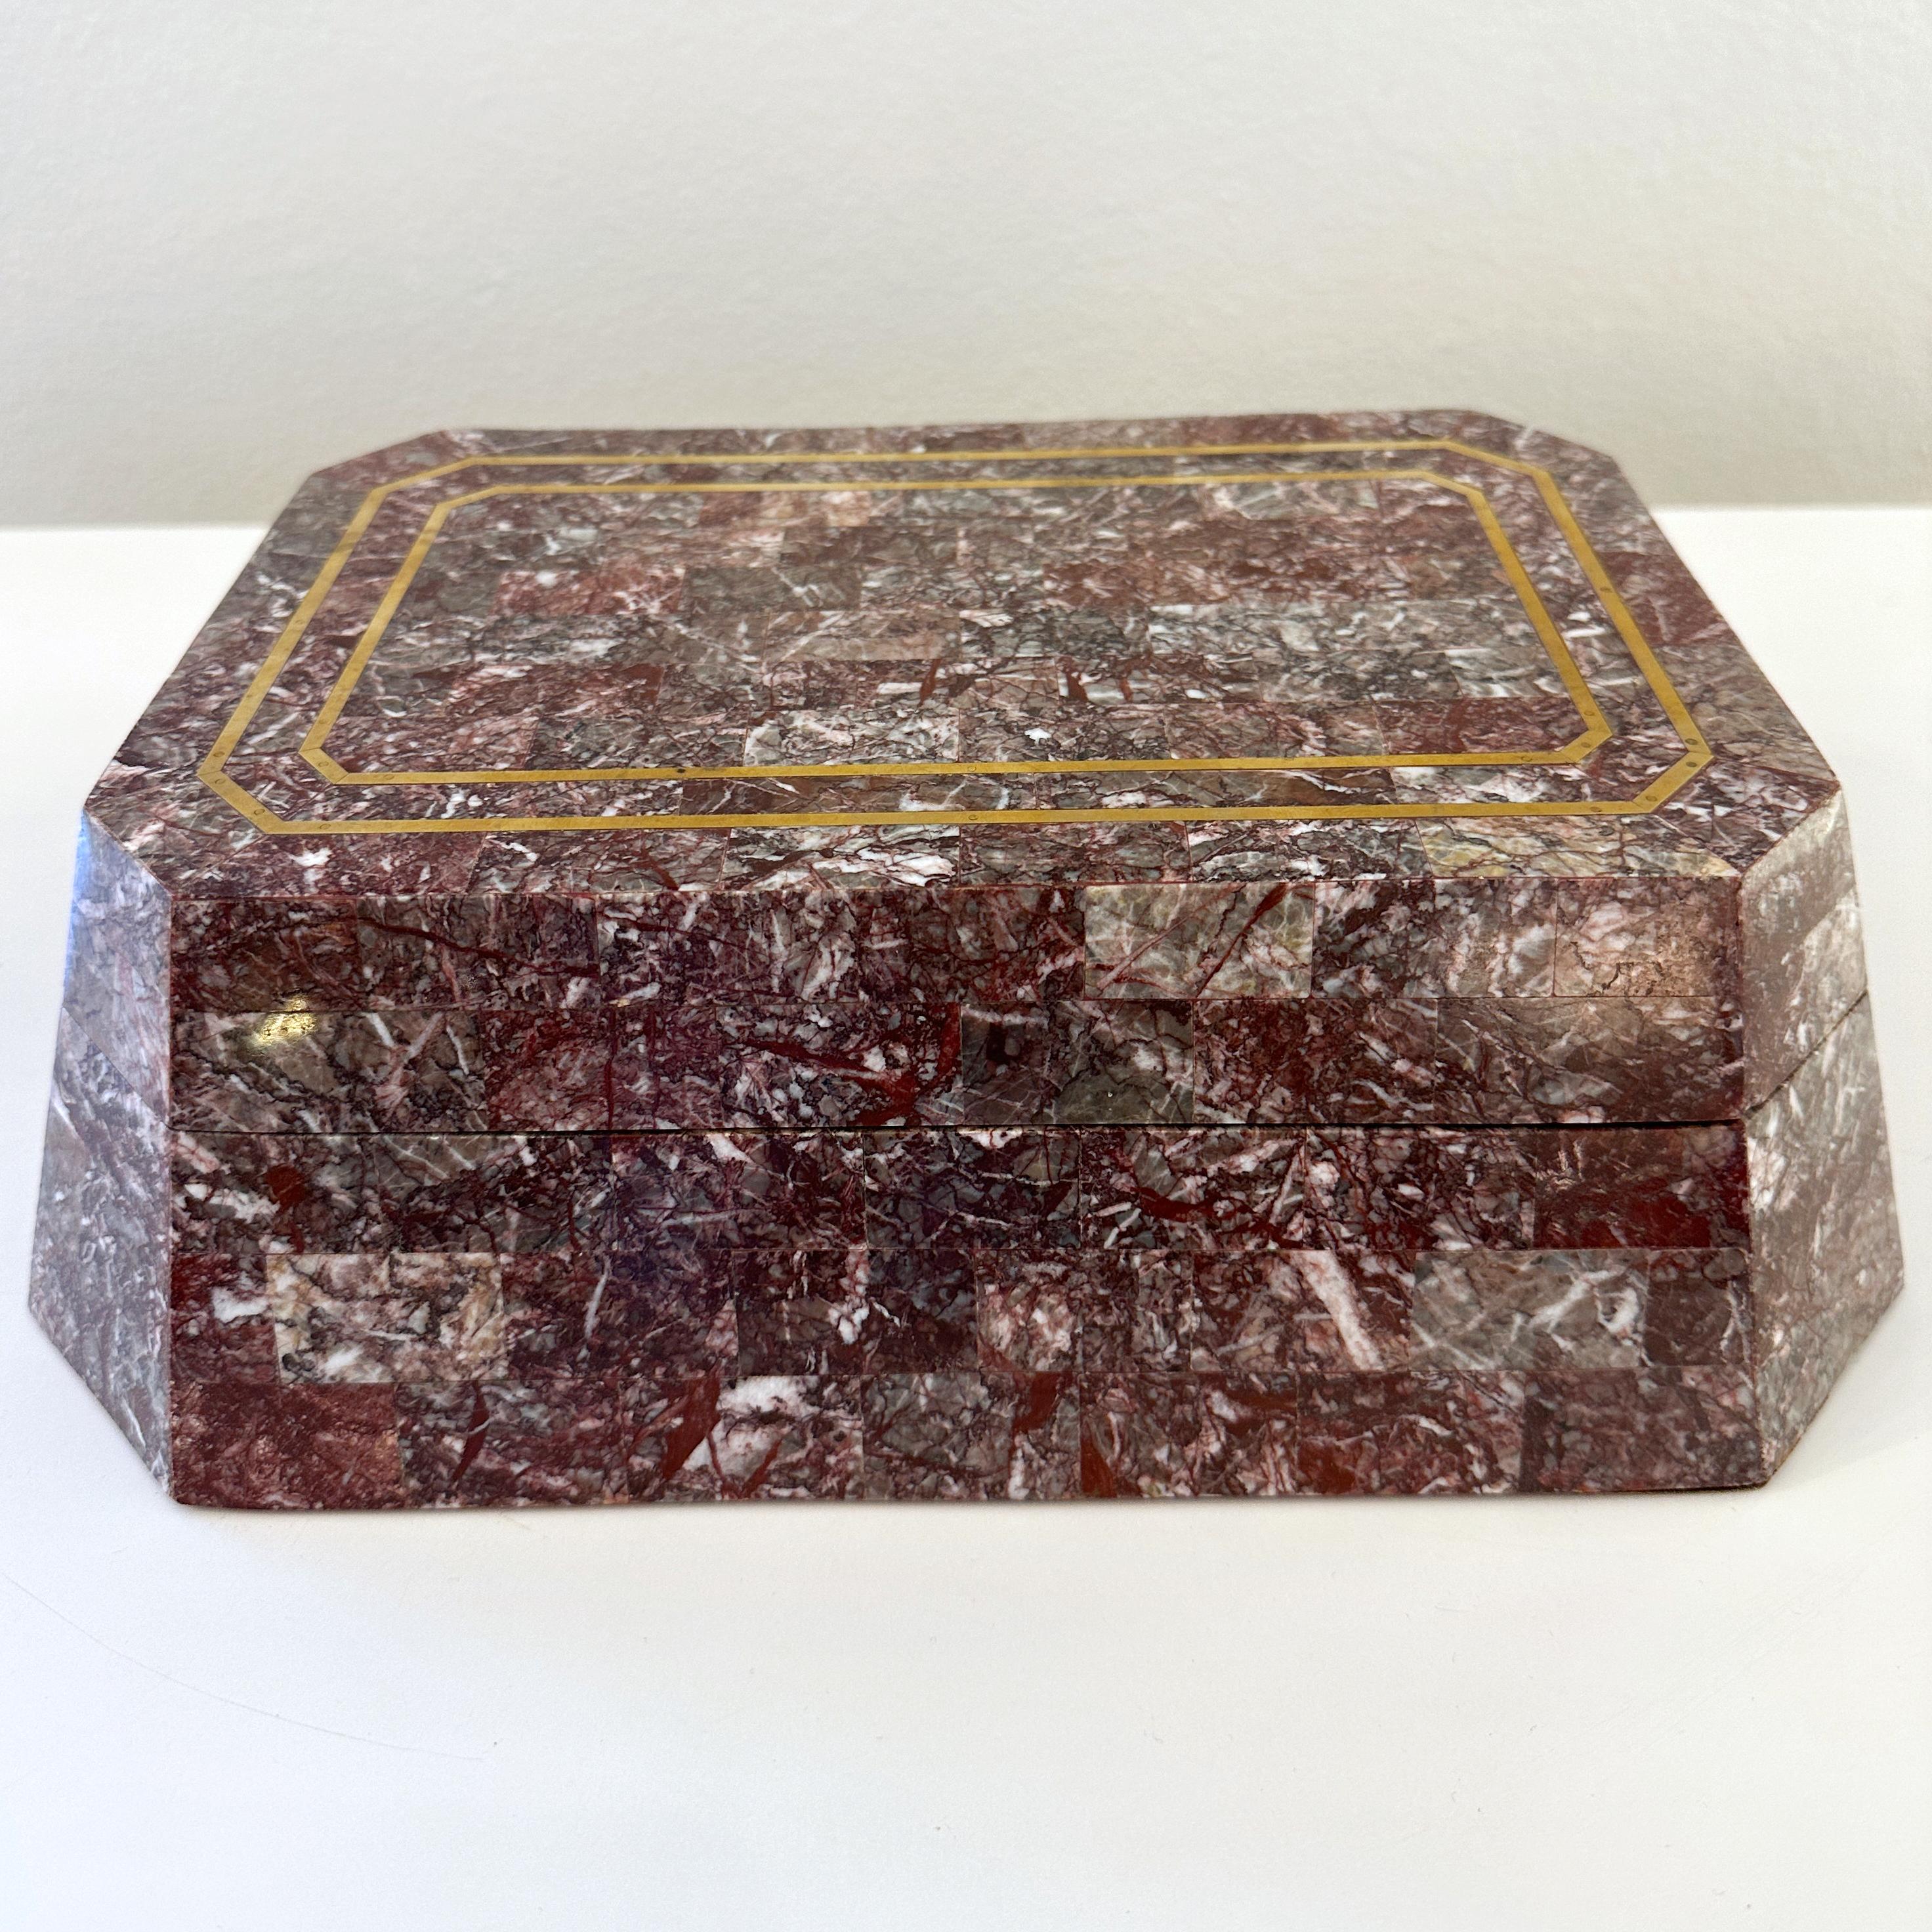 Exquisite Maitland Smith Tessellated Rosso Levanto Marble Box, ca 1990s. 

This octagonal slope sided box is clad in a beautiful tessellated rosso levanto marble and accented with a brass inlay on the top of the lid that has aged to a mellowed tone.